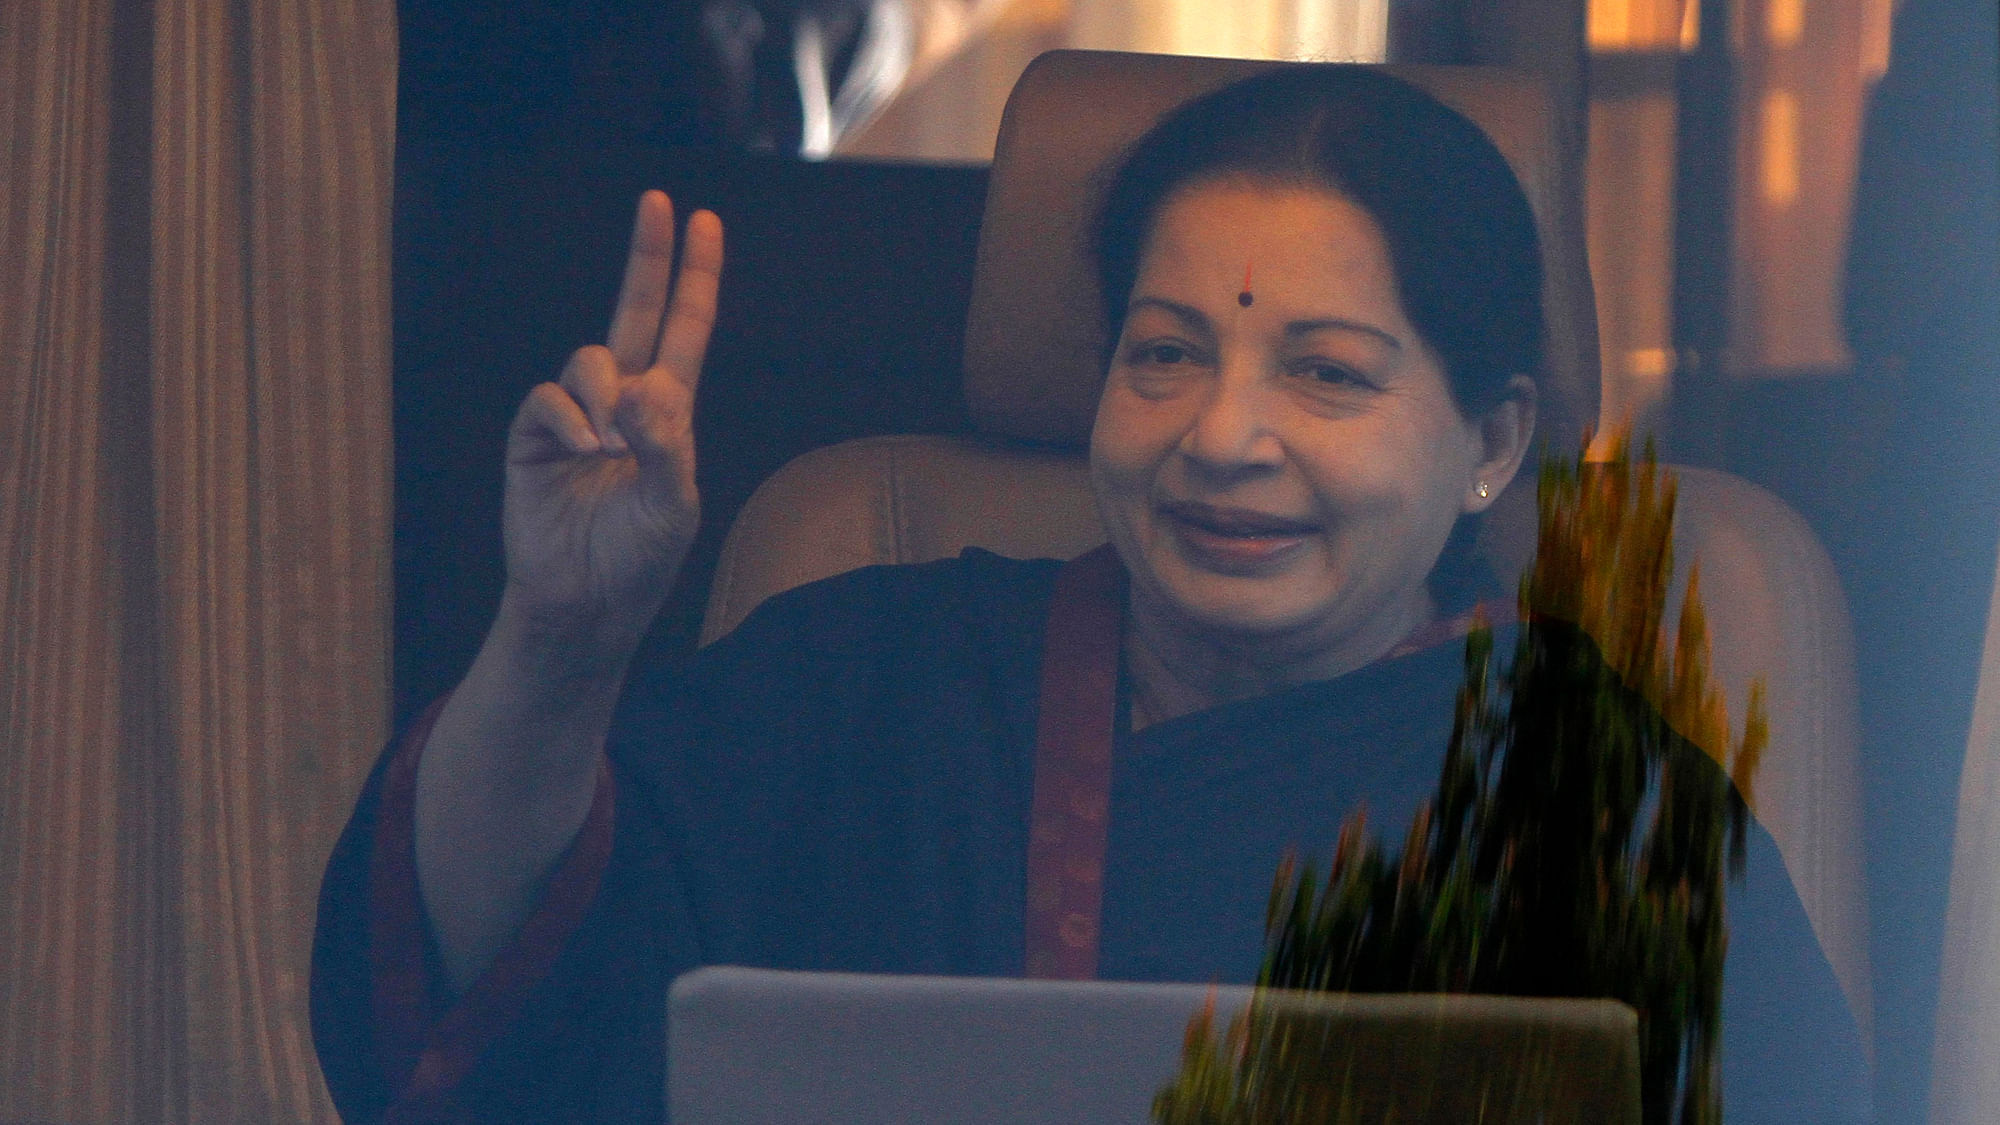 Tamil Nadu Chief Minister and AIADMK chief J Jayalalithaa has been hospitalised since 22 September. (Photo: Reuters)